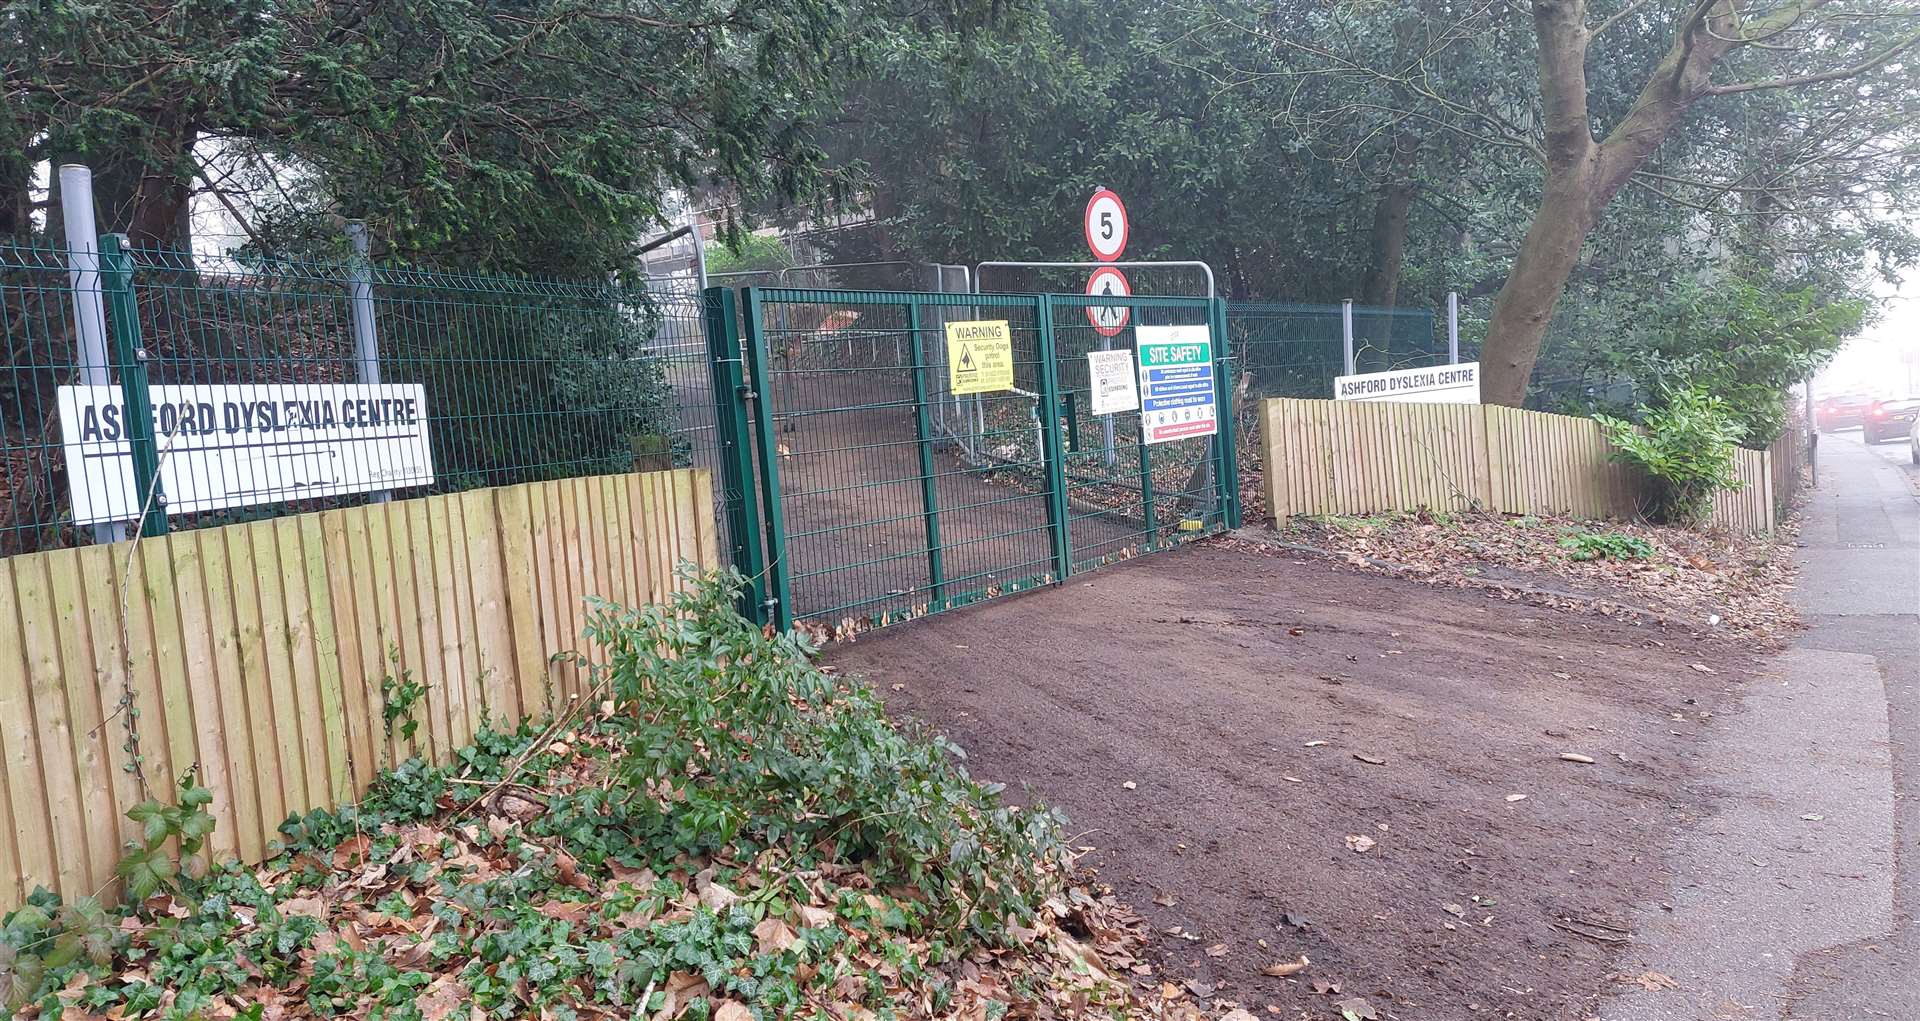 Braethorpe now has 24-hour security on site; new fencing was recently erected around the building